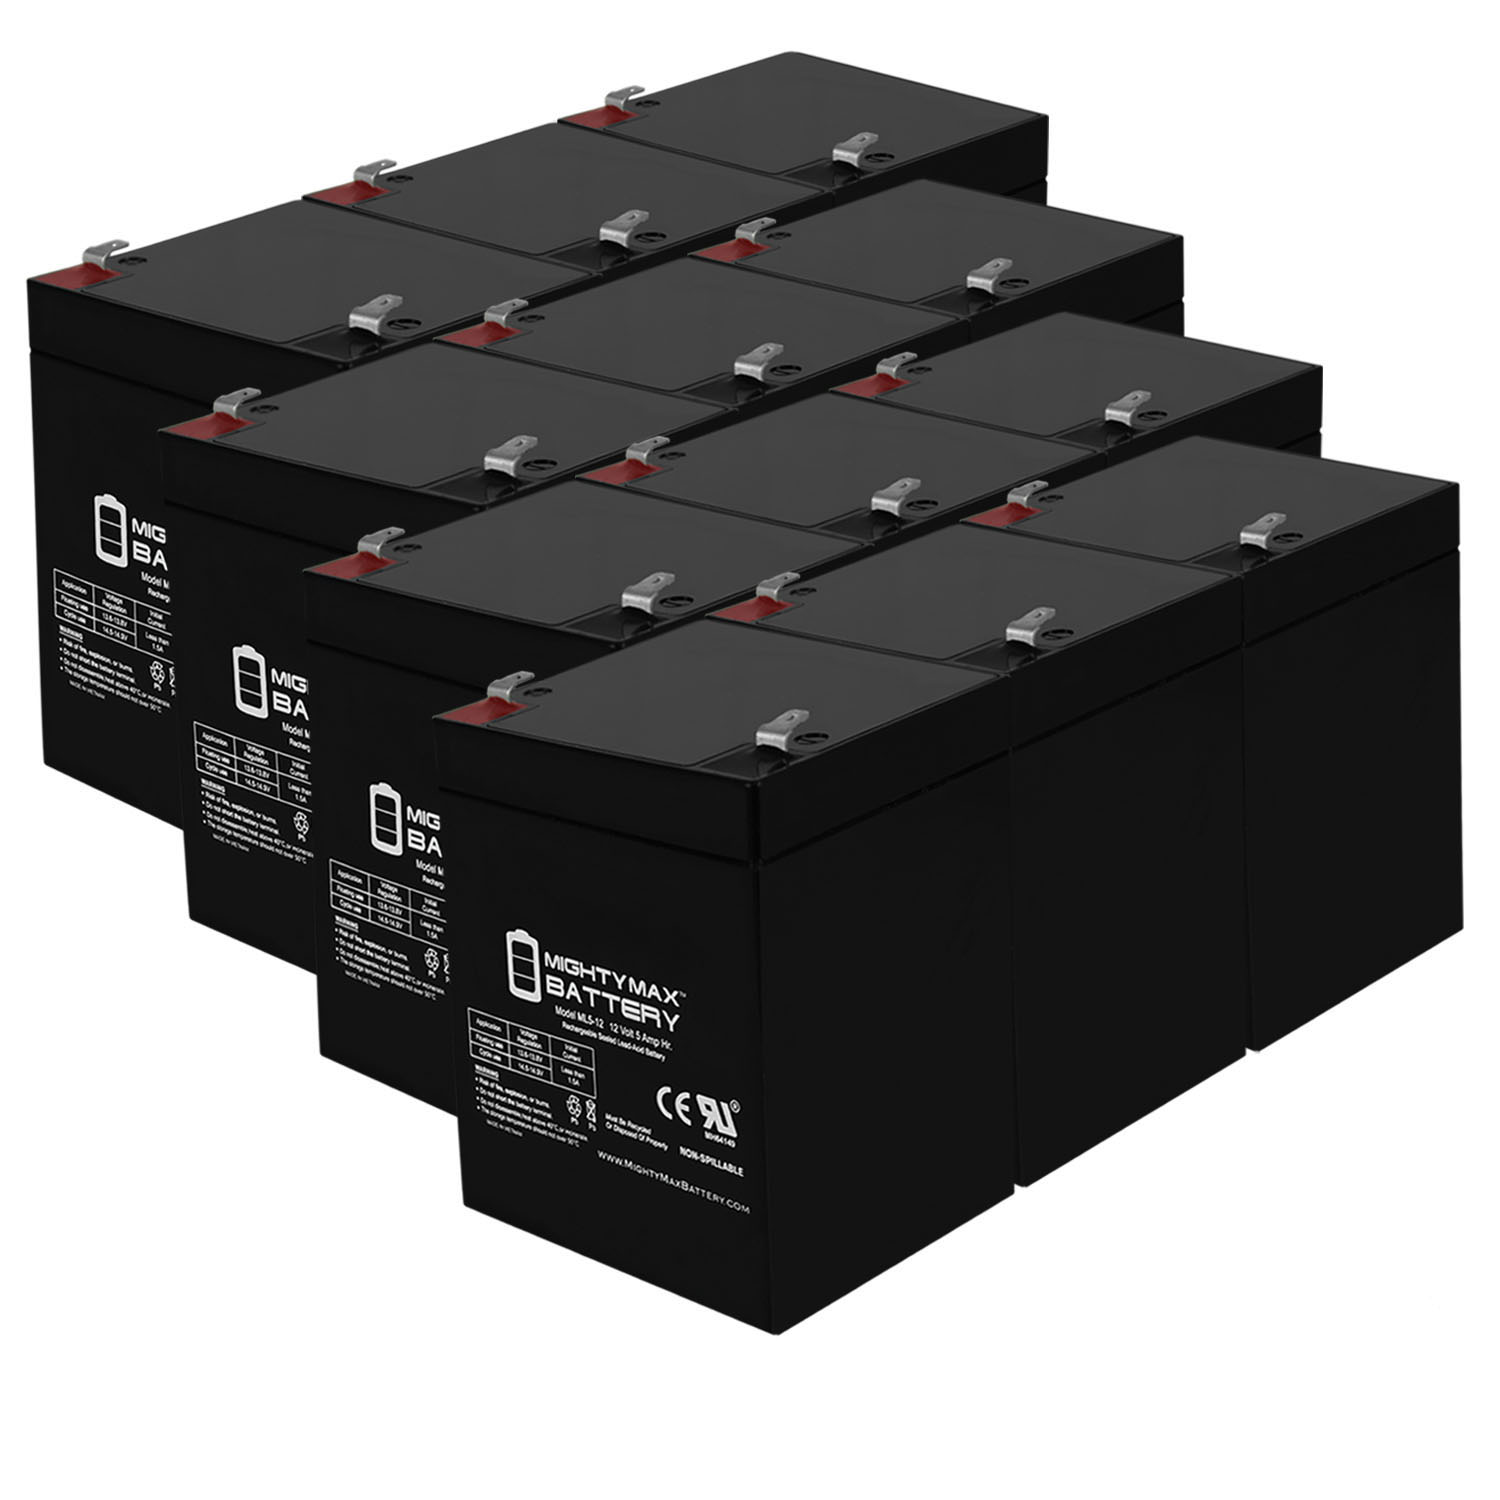 12V 5AH SLA Replacement Battery for Hawker Cyclon 0809-0016 - 12 Pack